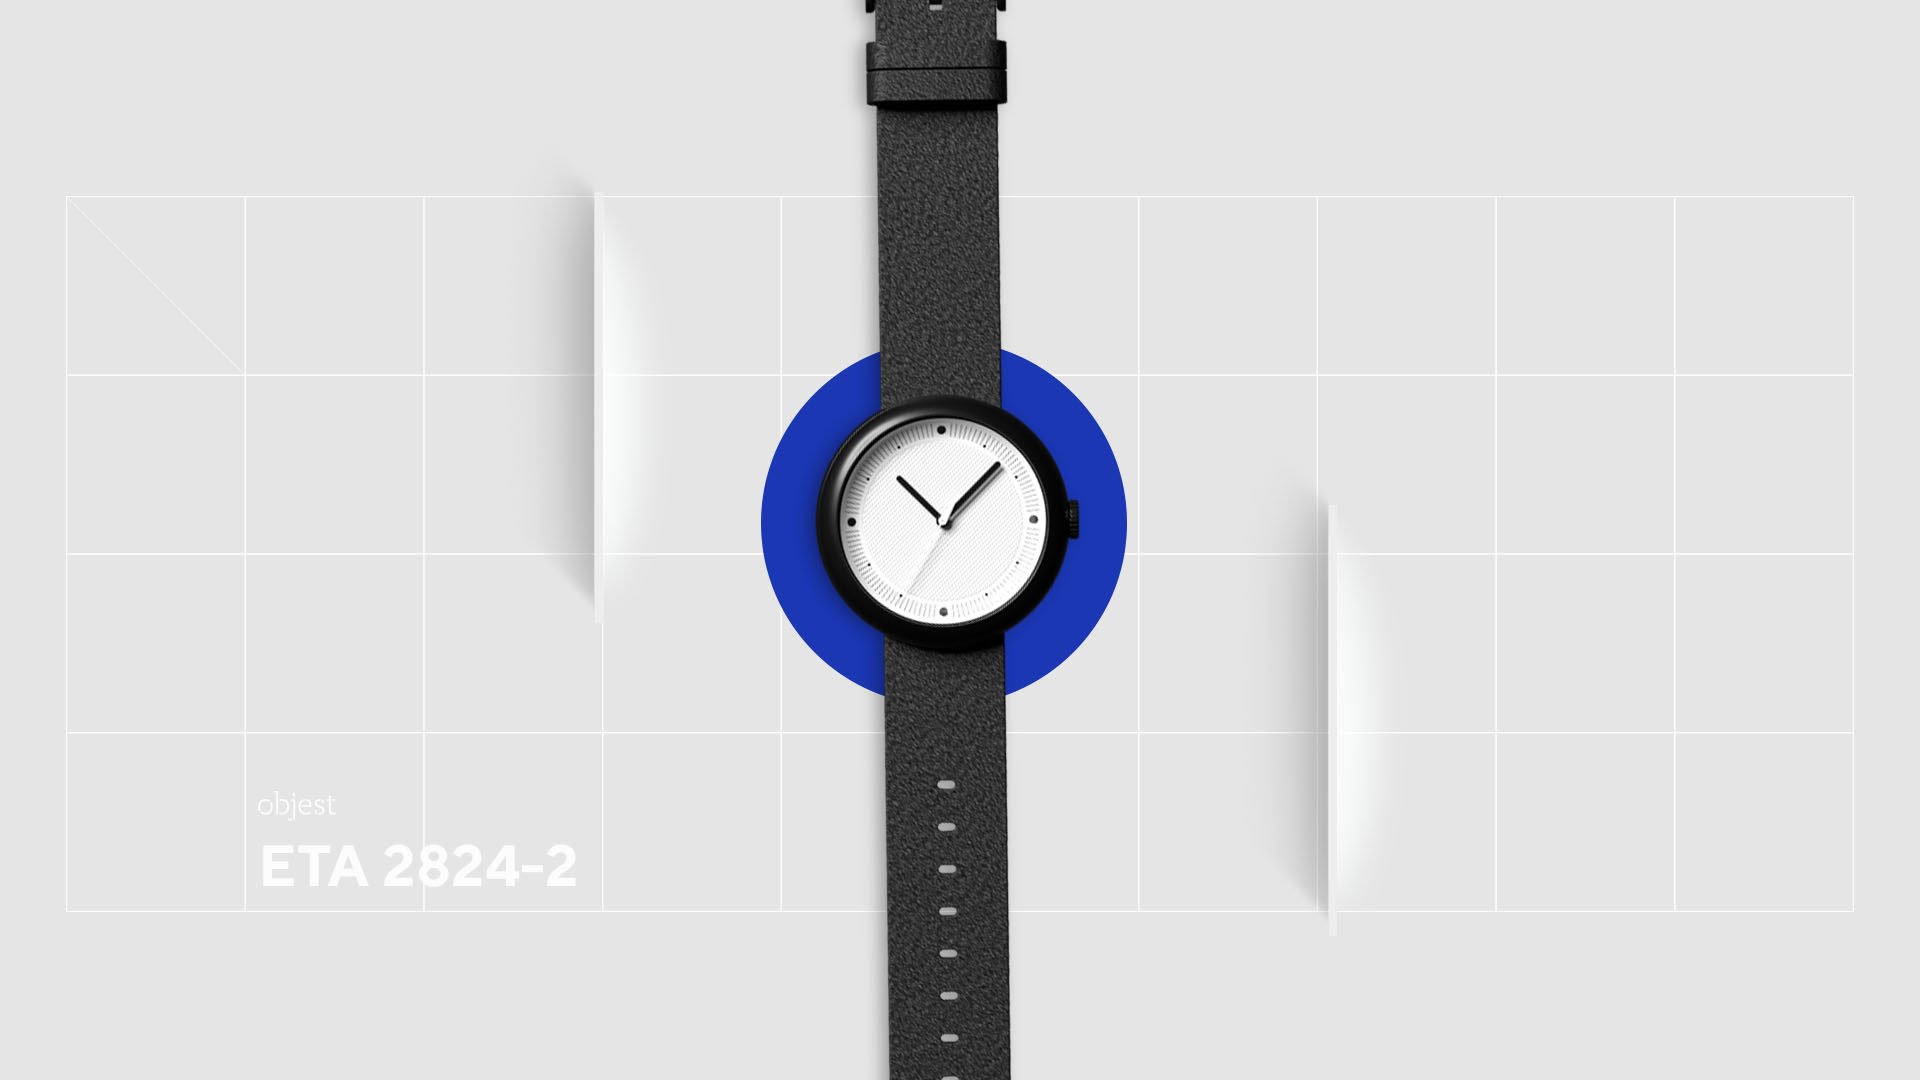 Objest Watches | The Coolector